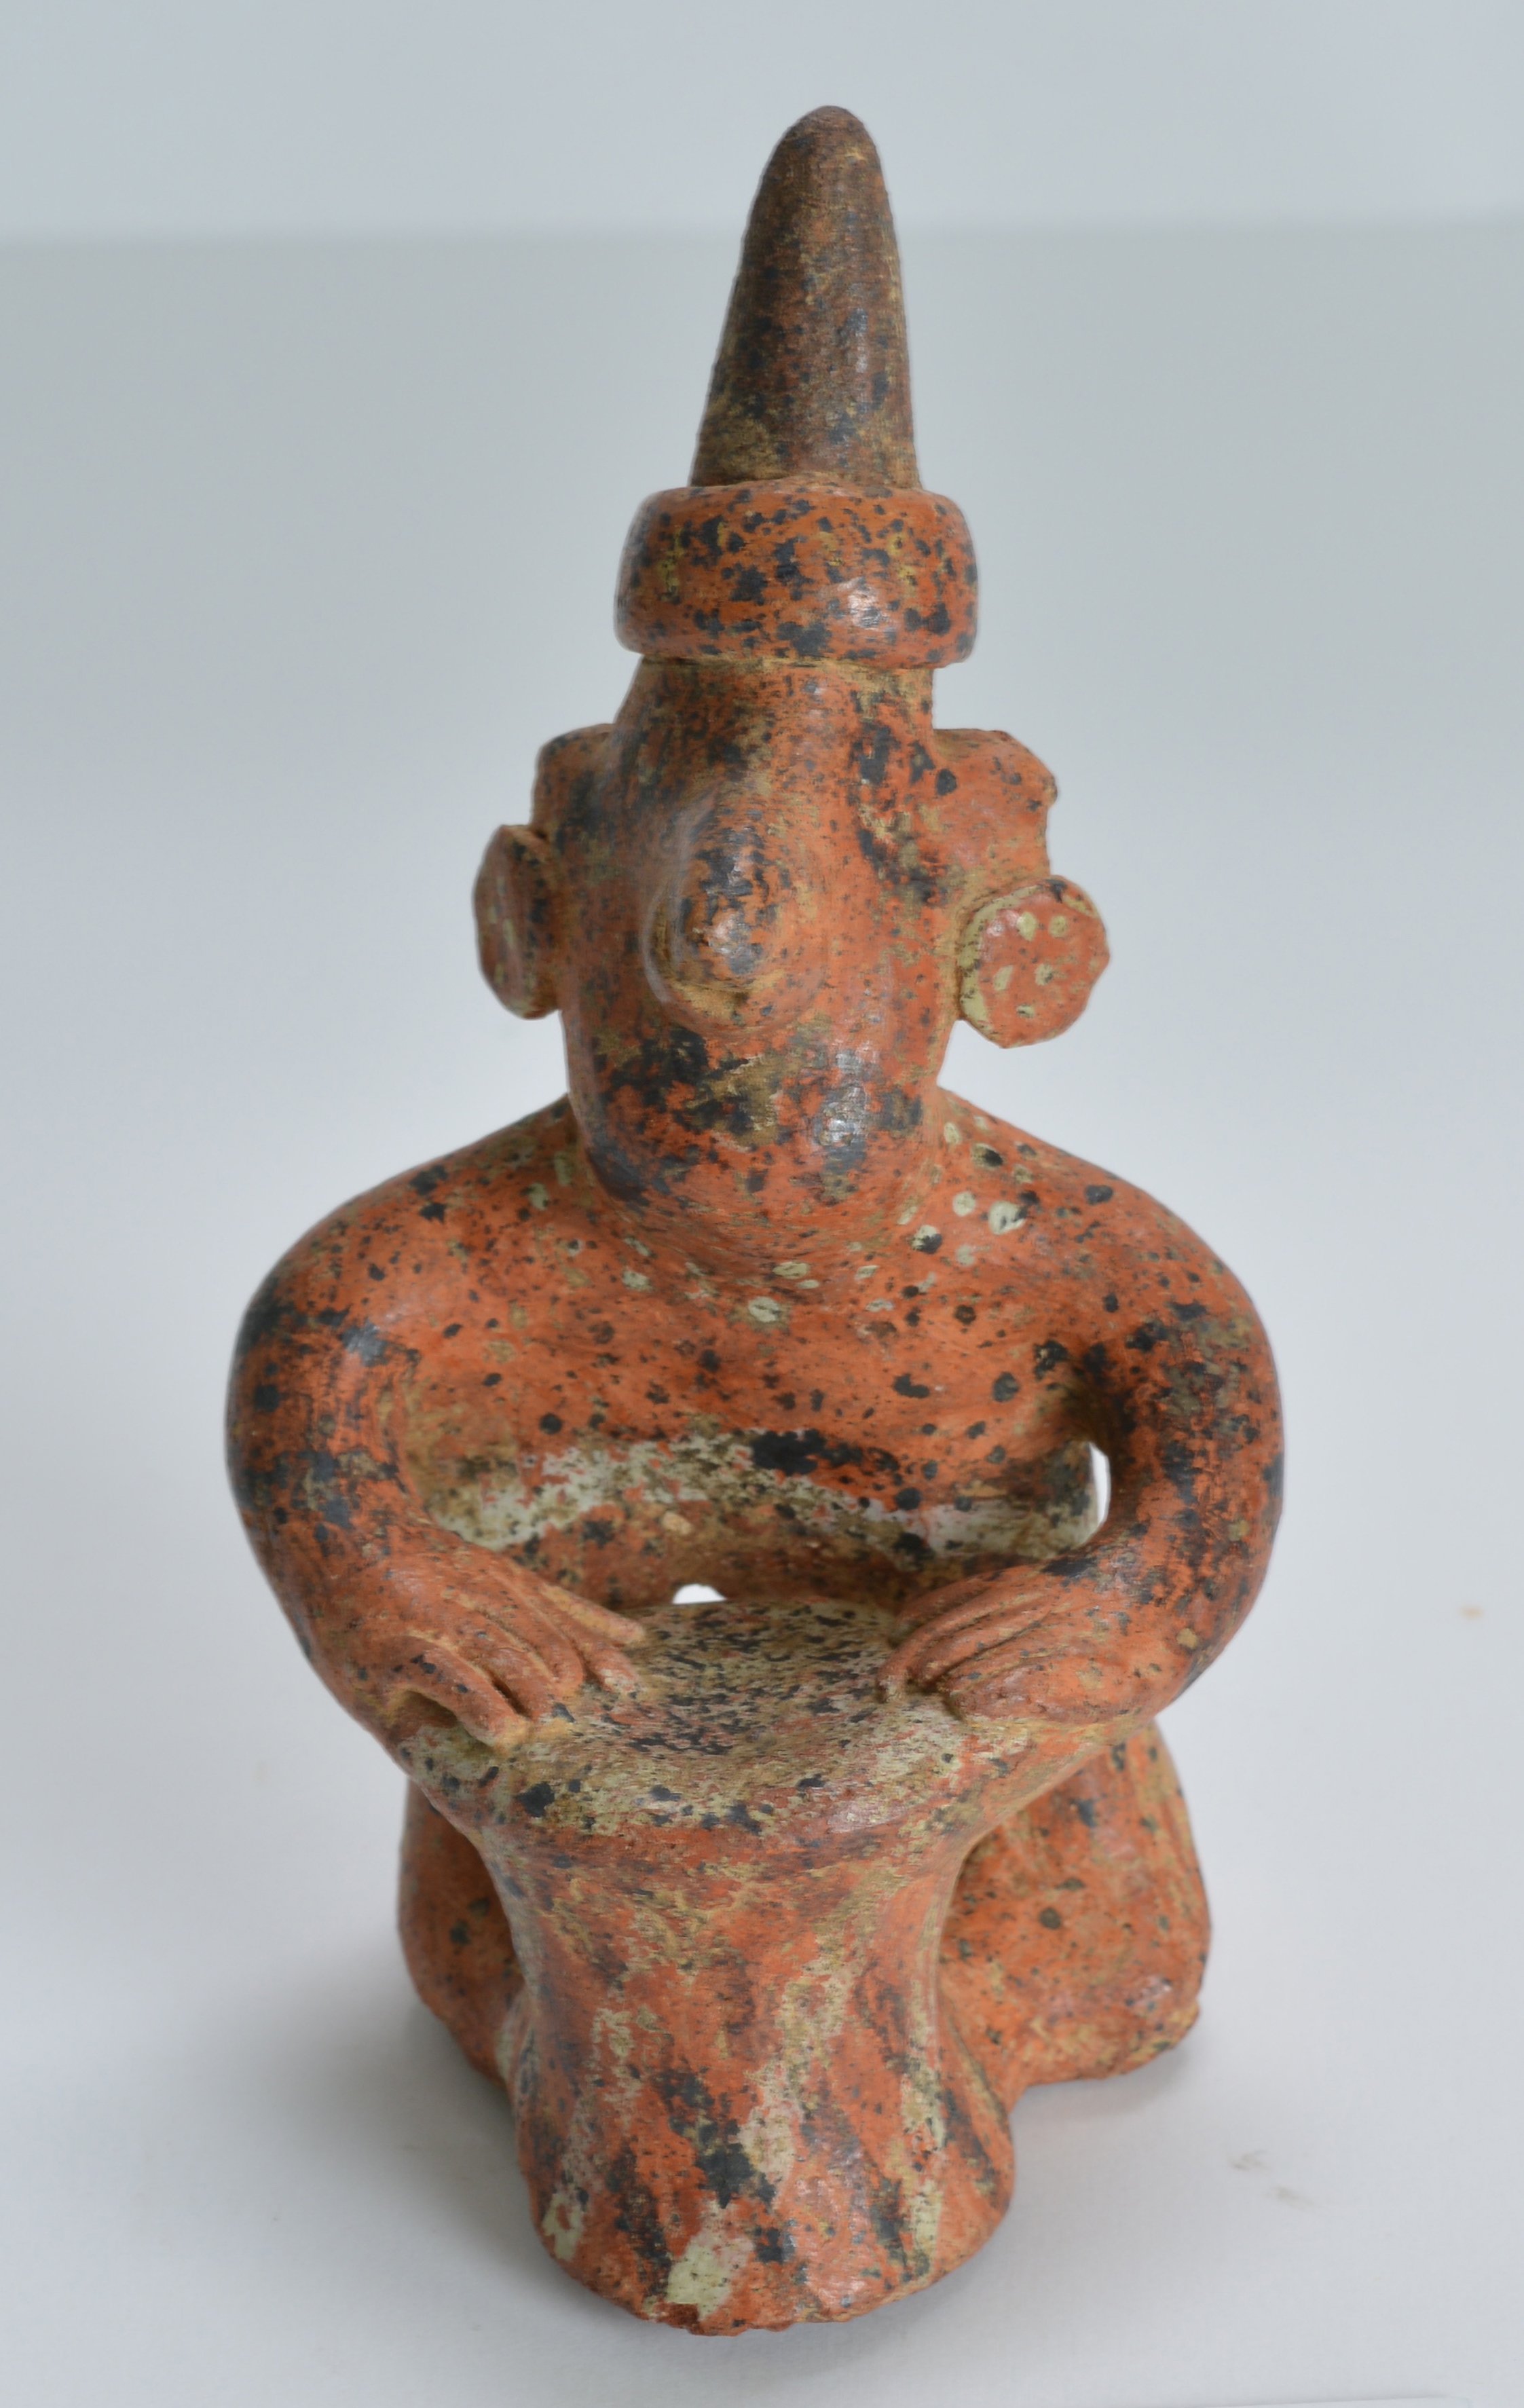 Nayarit, Male Figure with Drum, 50 BCE - 250 CE, ceramic, Gift of William O. Gross Jr. 1987.009